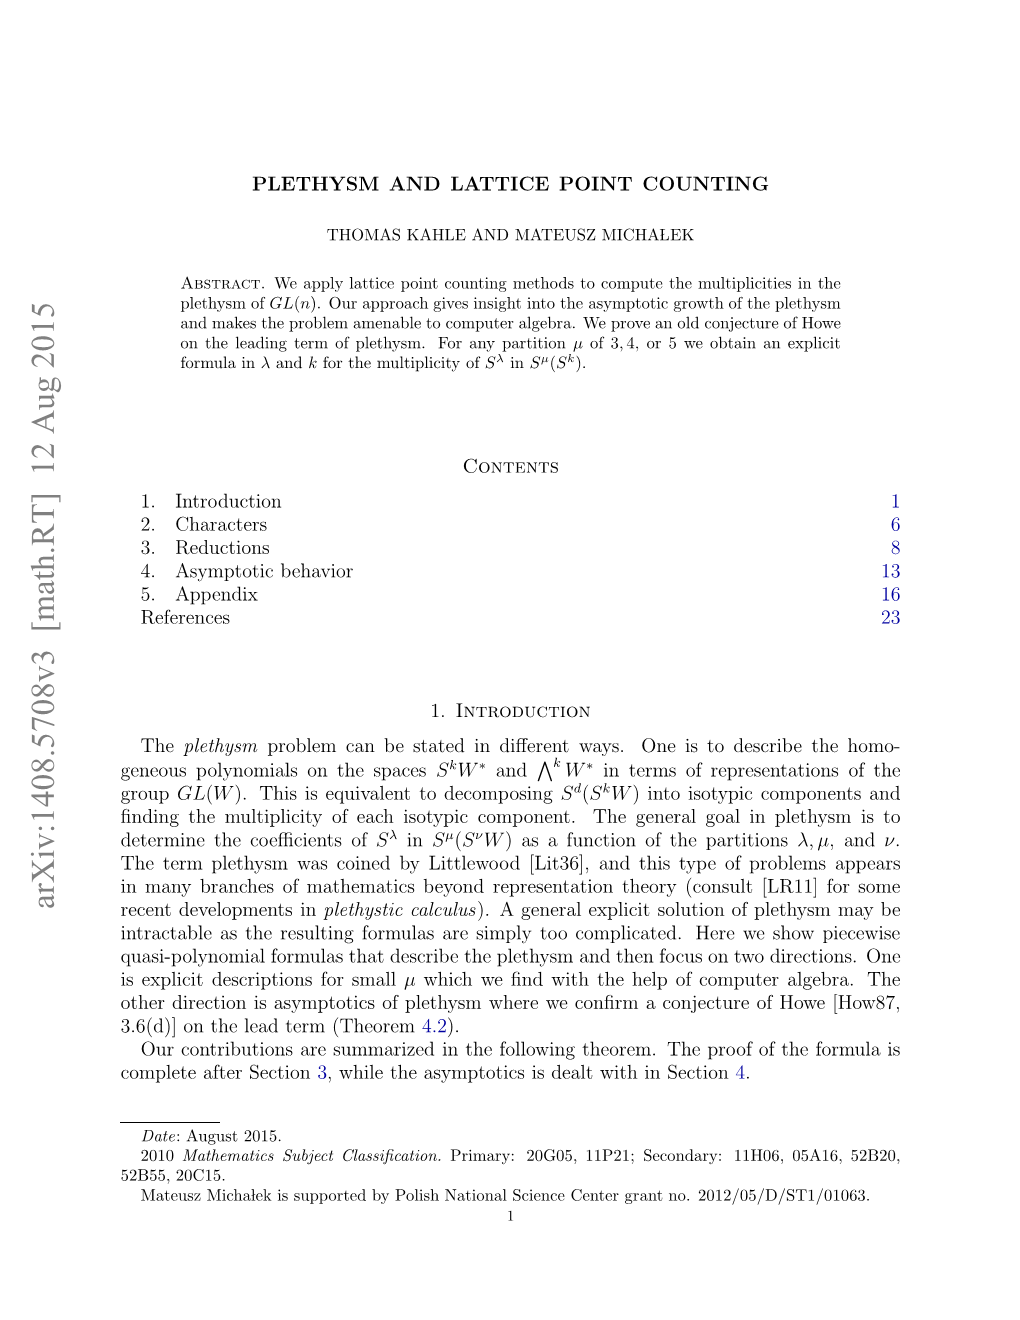 Plethysm and Lattice Point Counting 3